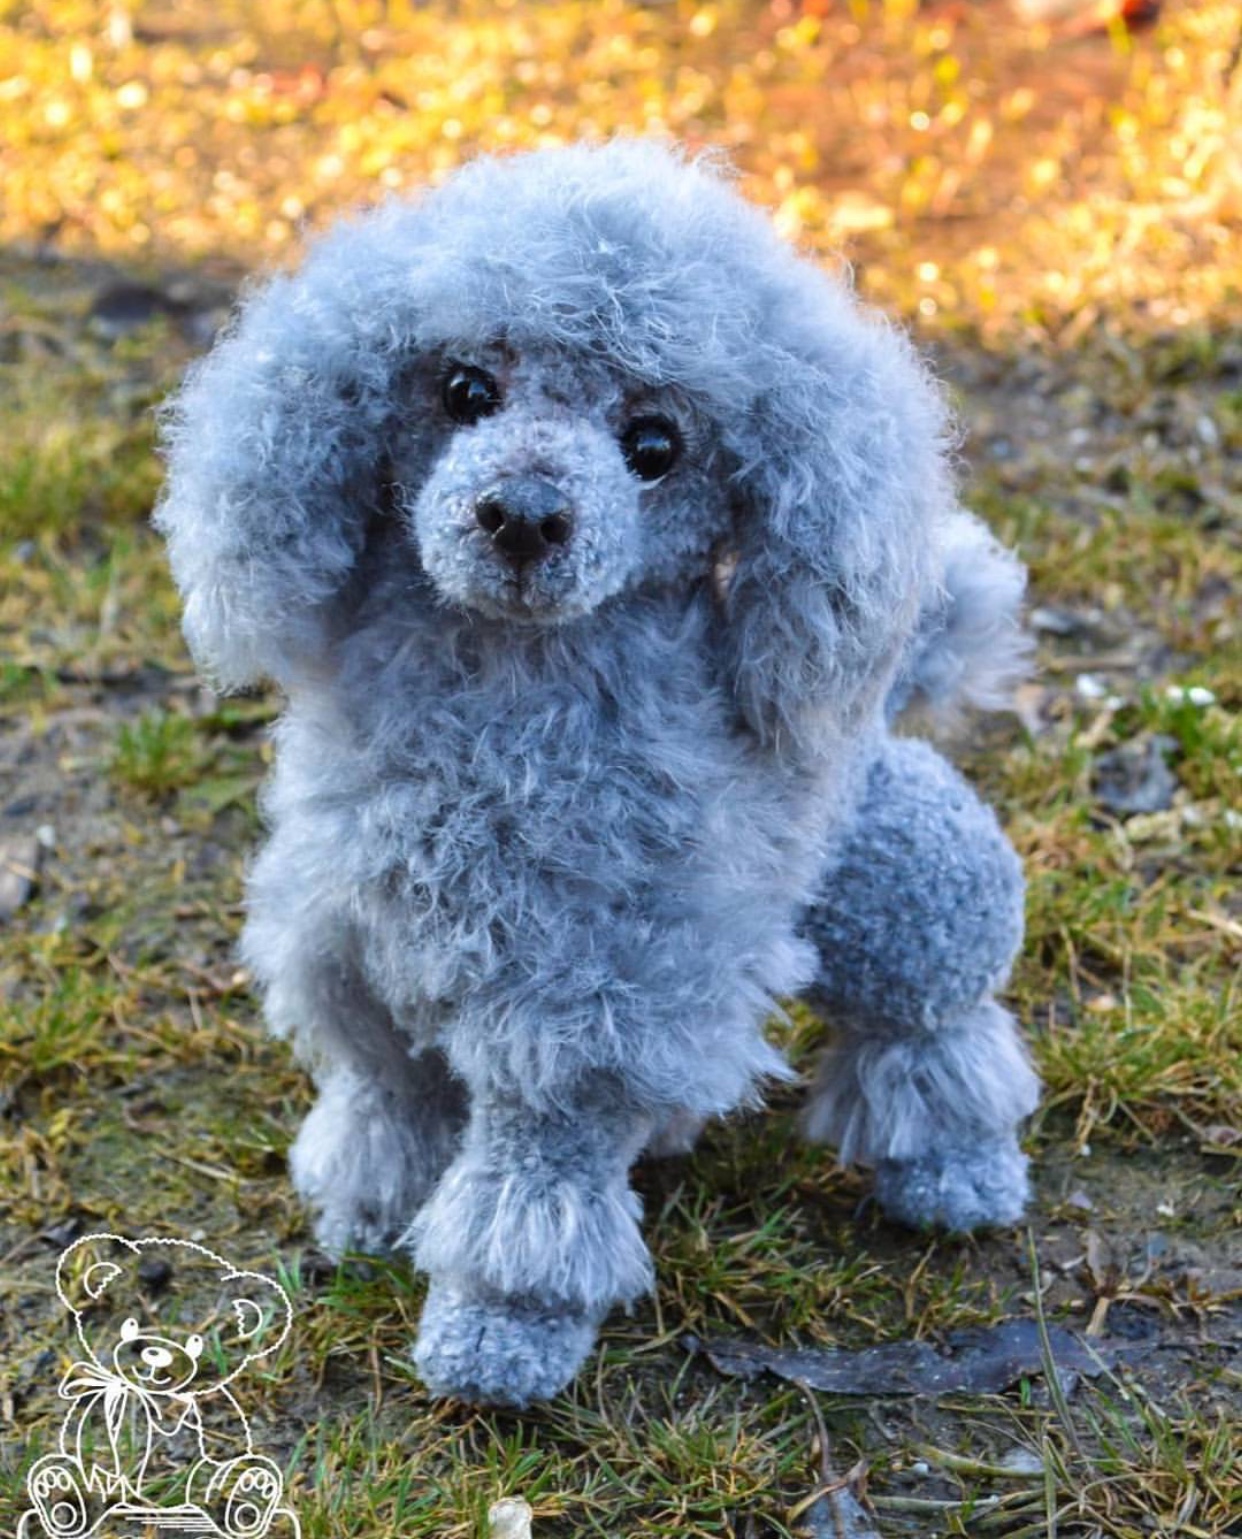 a gray Poodle puppy standing in the yard